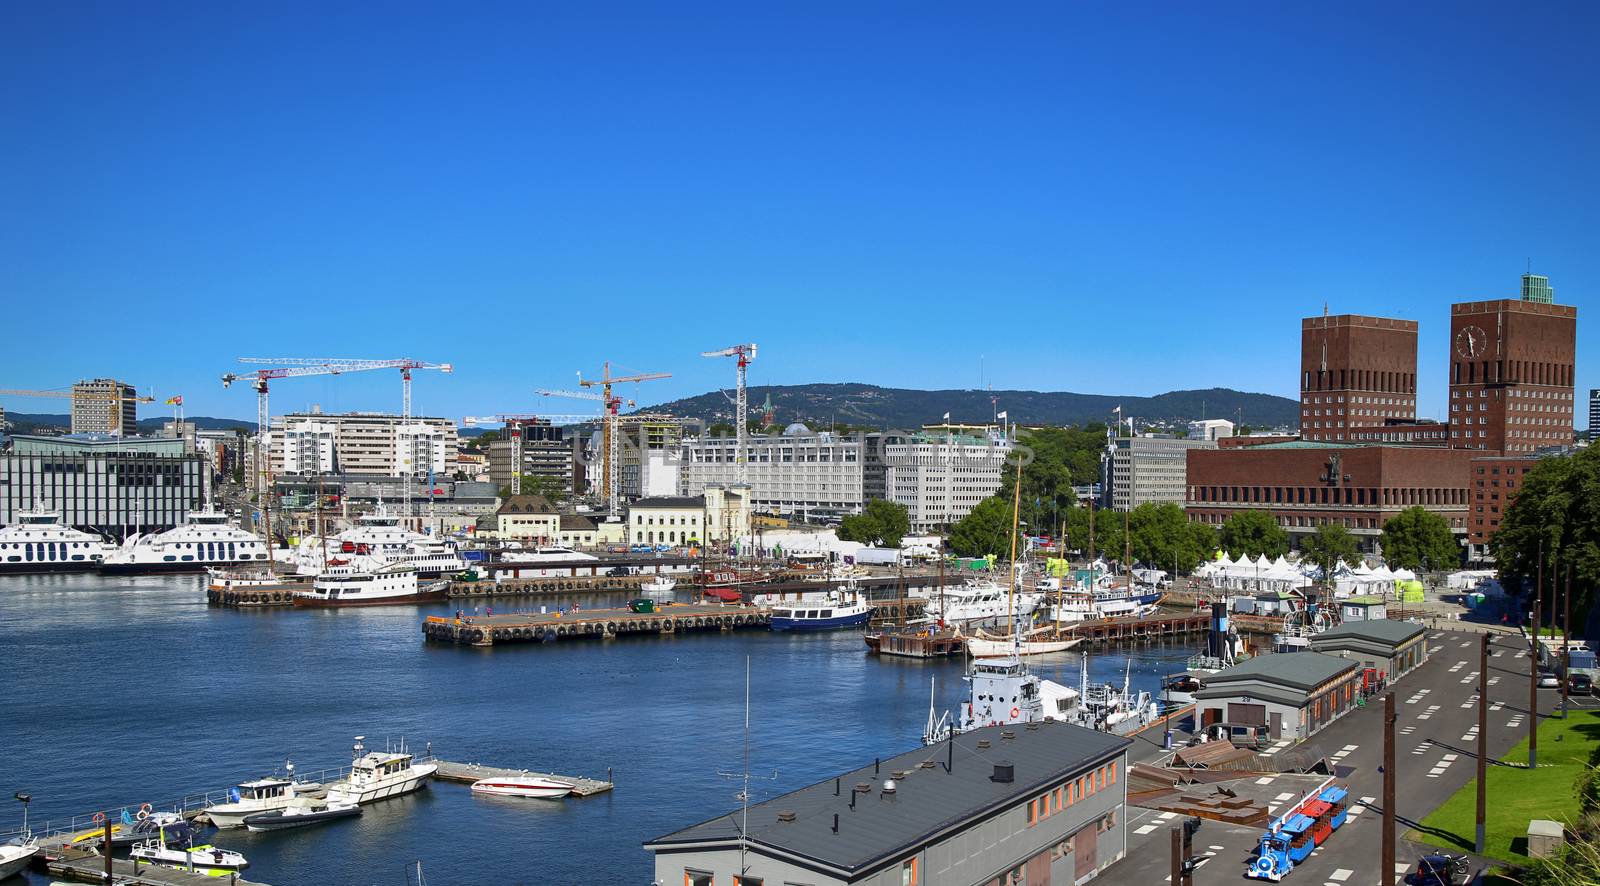 OSLO, NORWAY – AUGUST 17, 2016: View of panorama on Oslo Harbour and Oslo City Hall from Akershus fortress in Oslo, Norway on August 17, 2016.